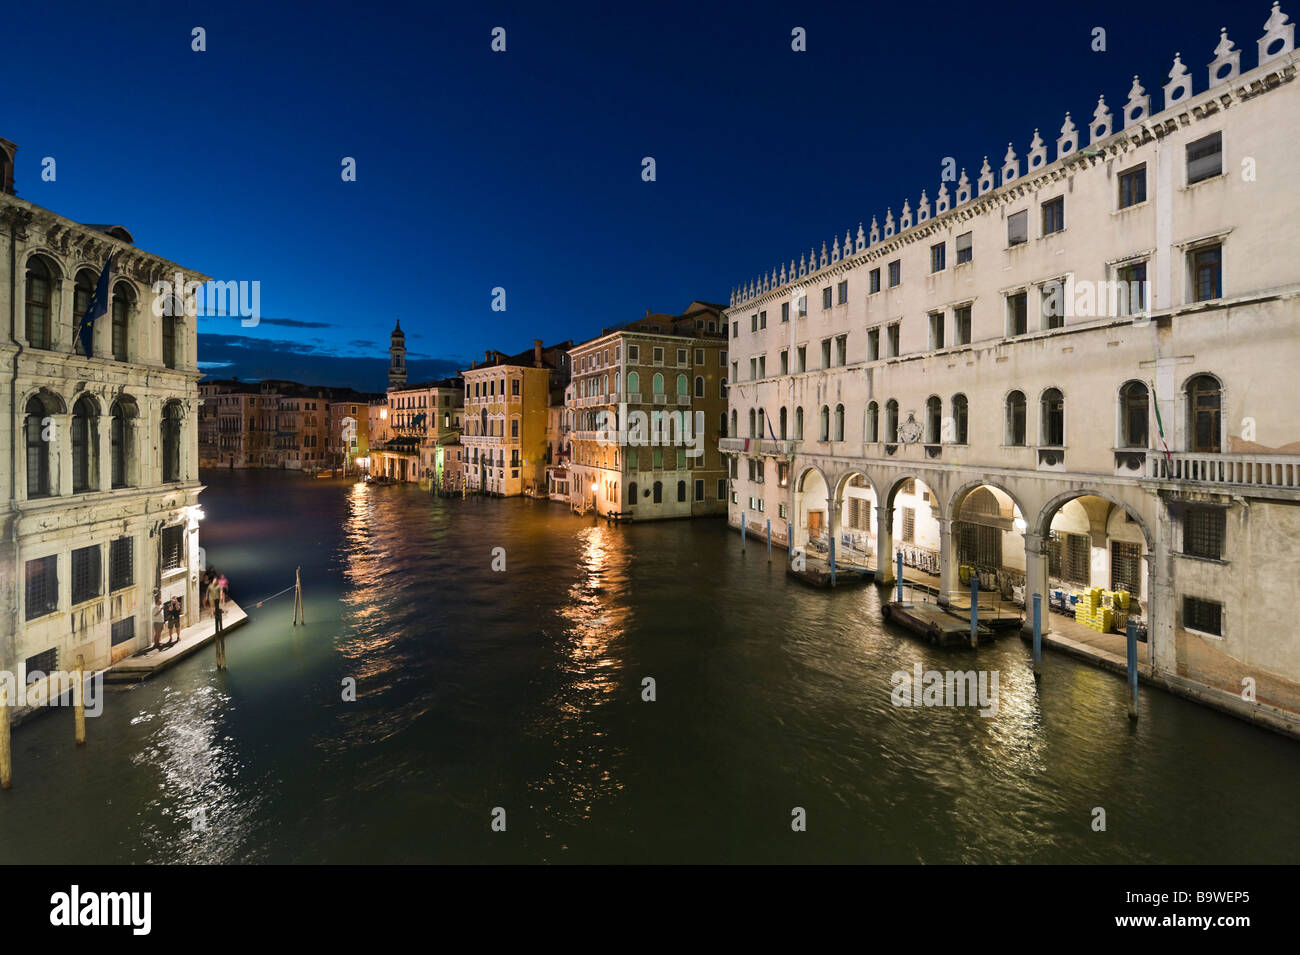 View of the Grand Canal from the Rialto Bridge at night with the main Post Office to the right, Venice, Veneto, Italy Stock Photo